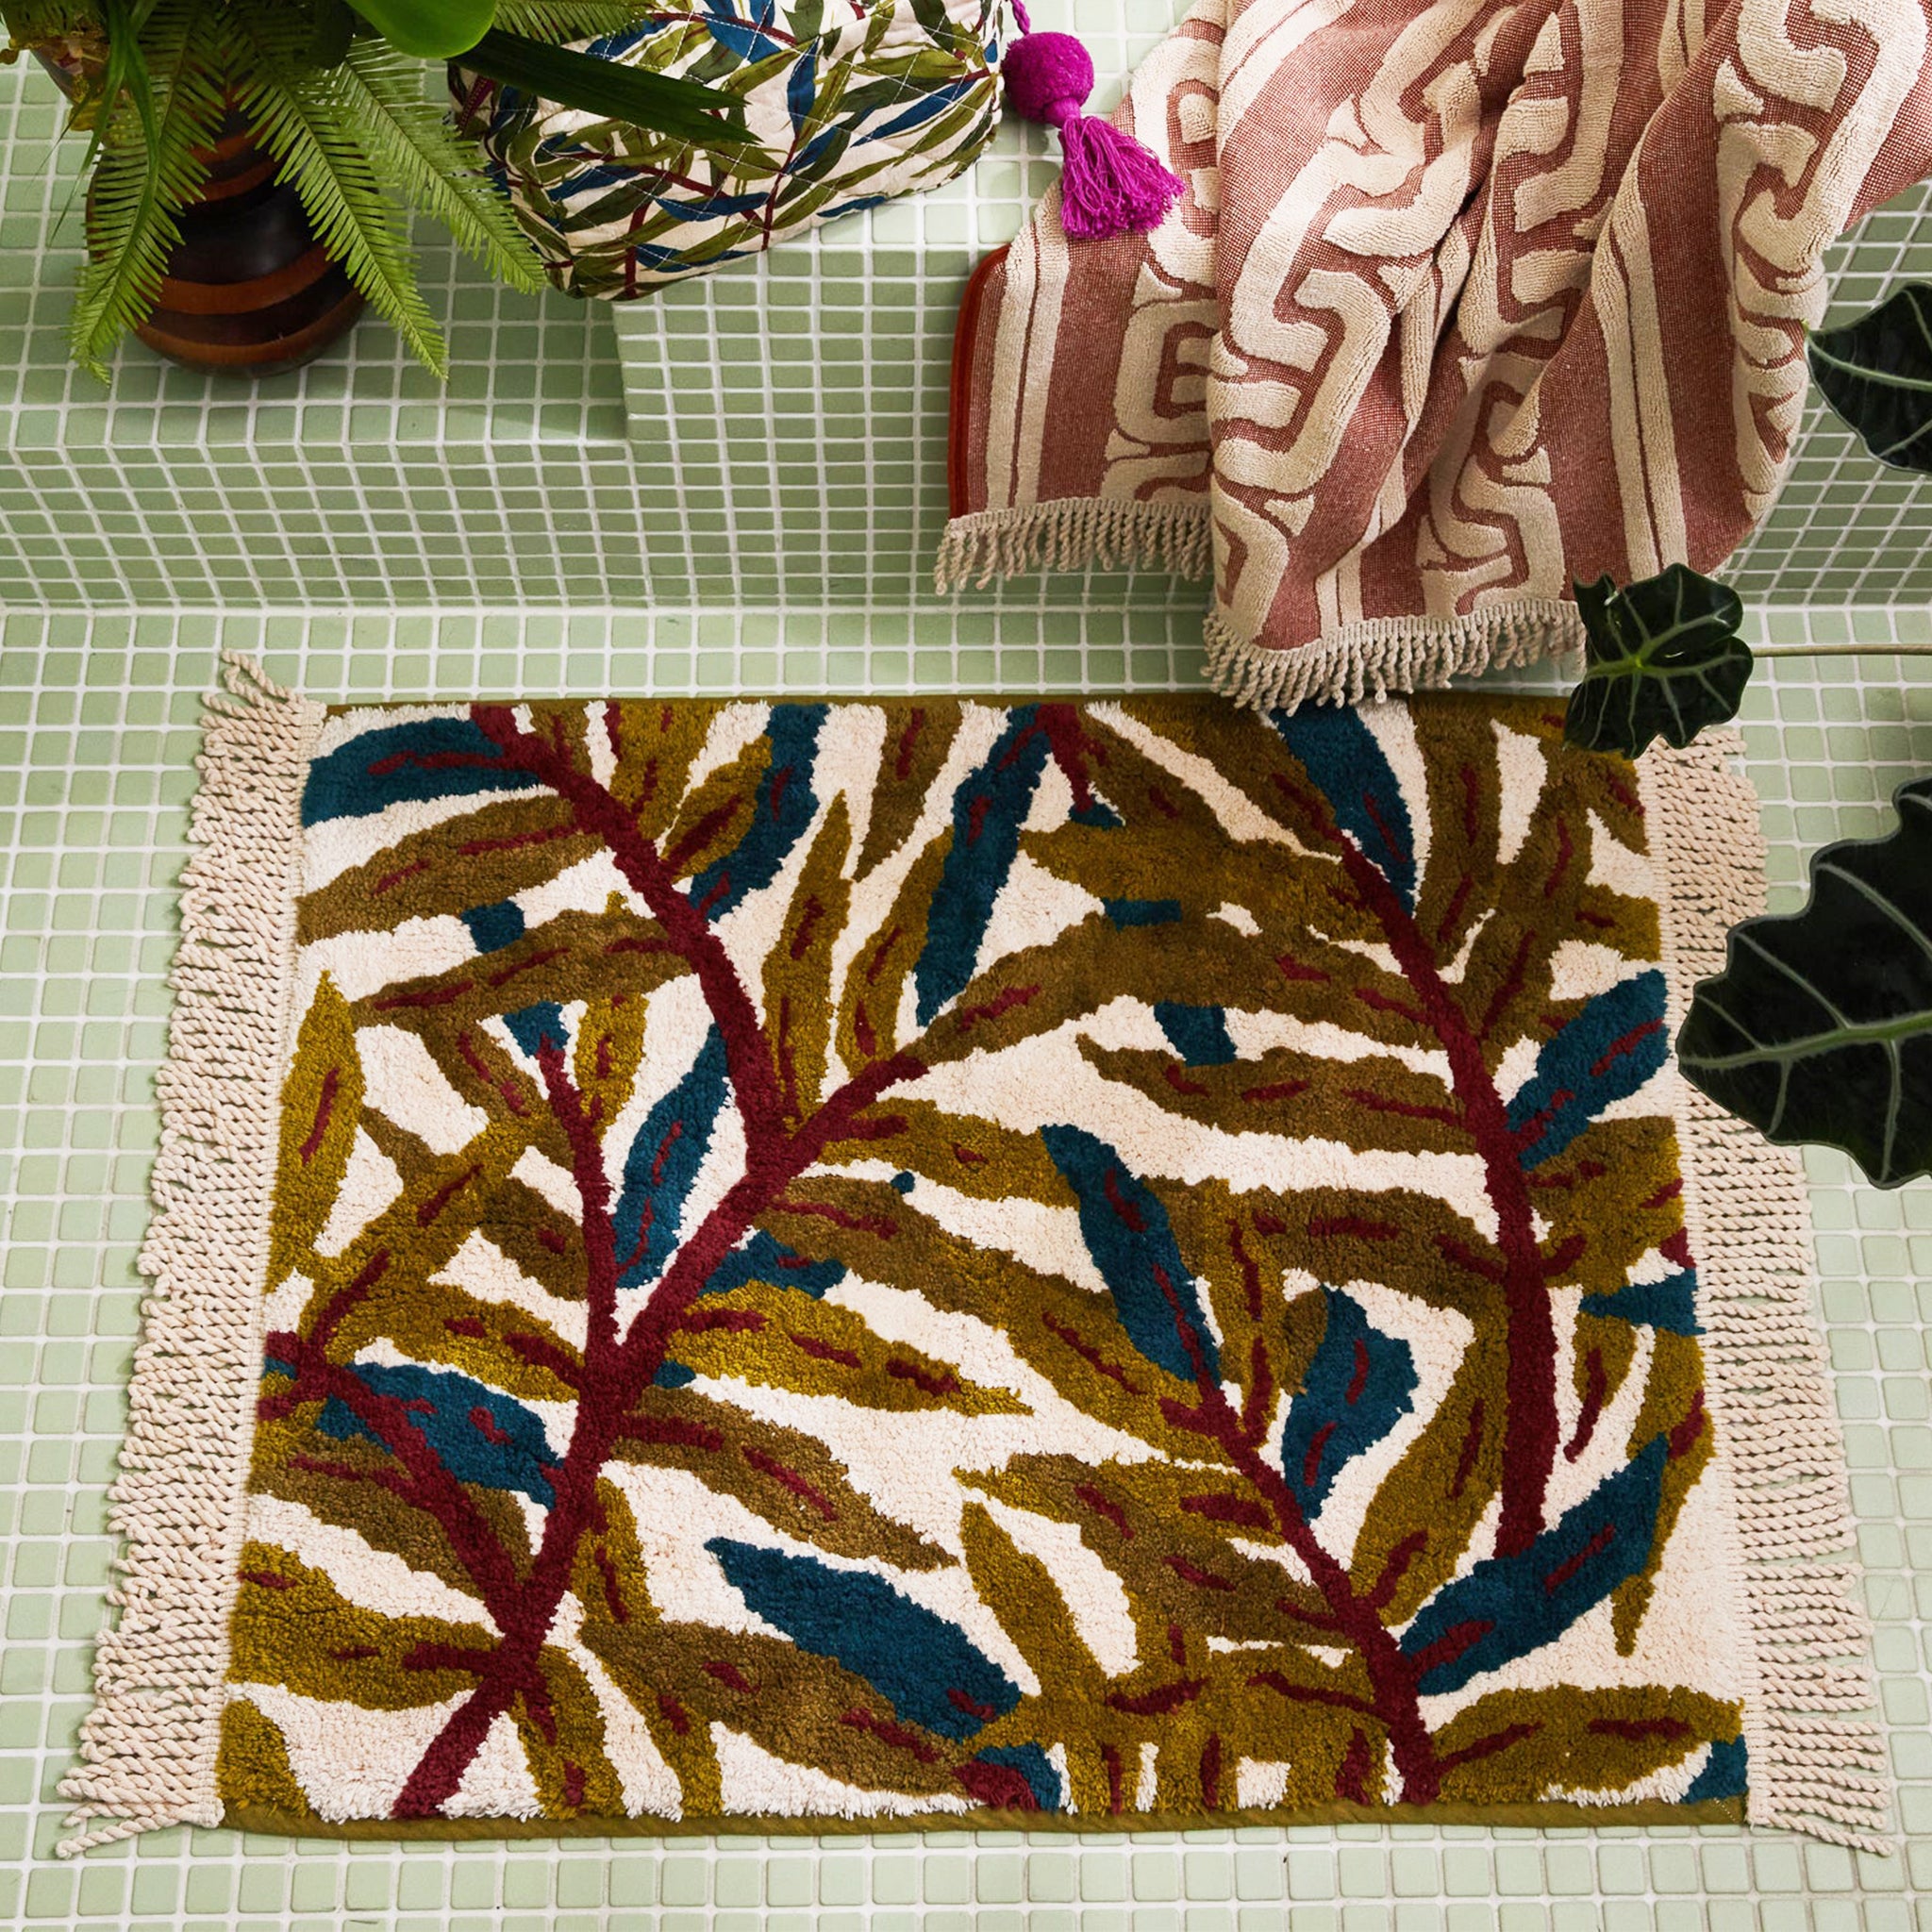 A green, teal and ivory tropical foliage printed bath mat with tassel details on each end.